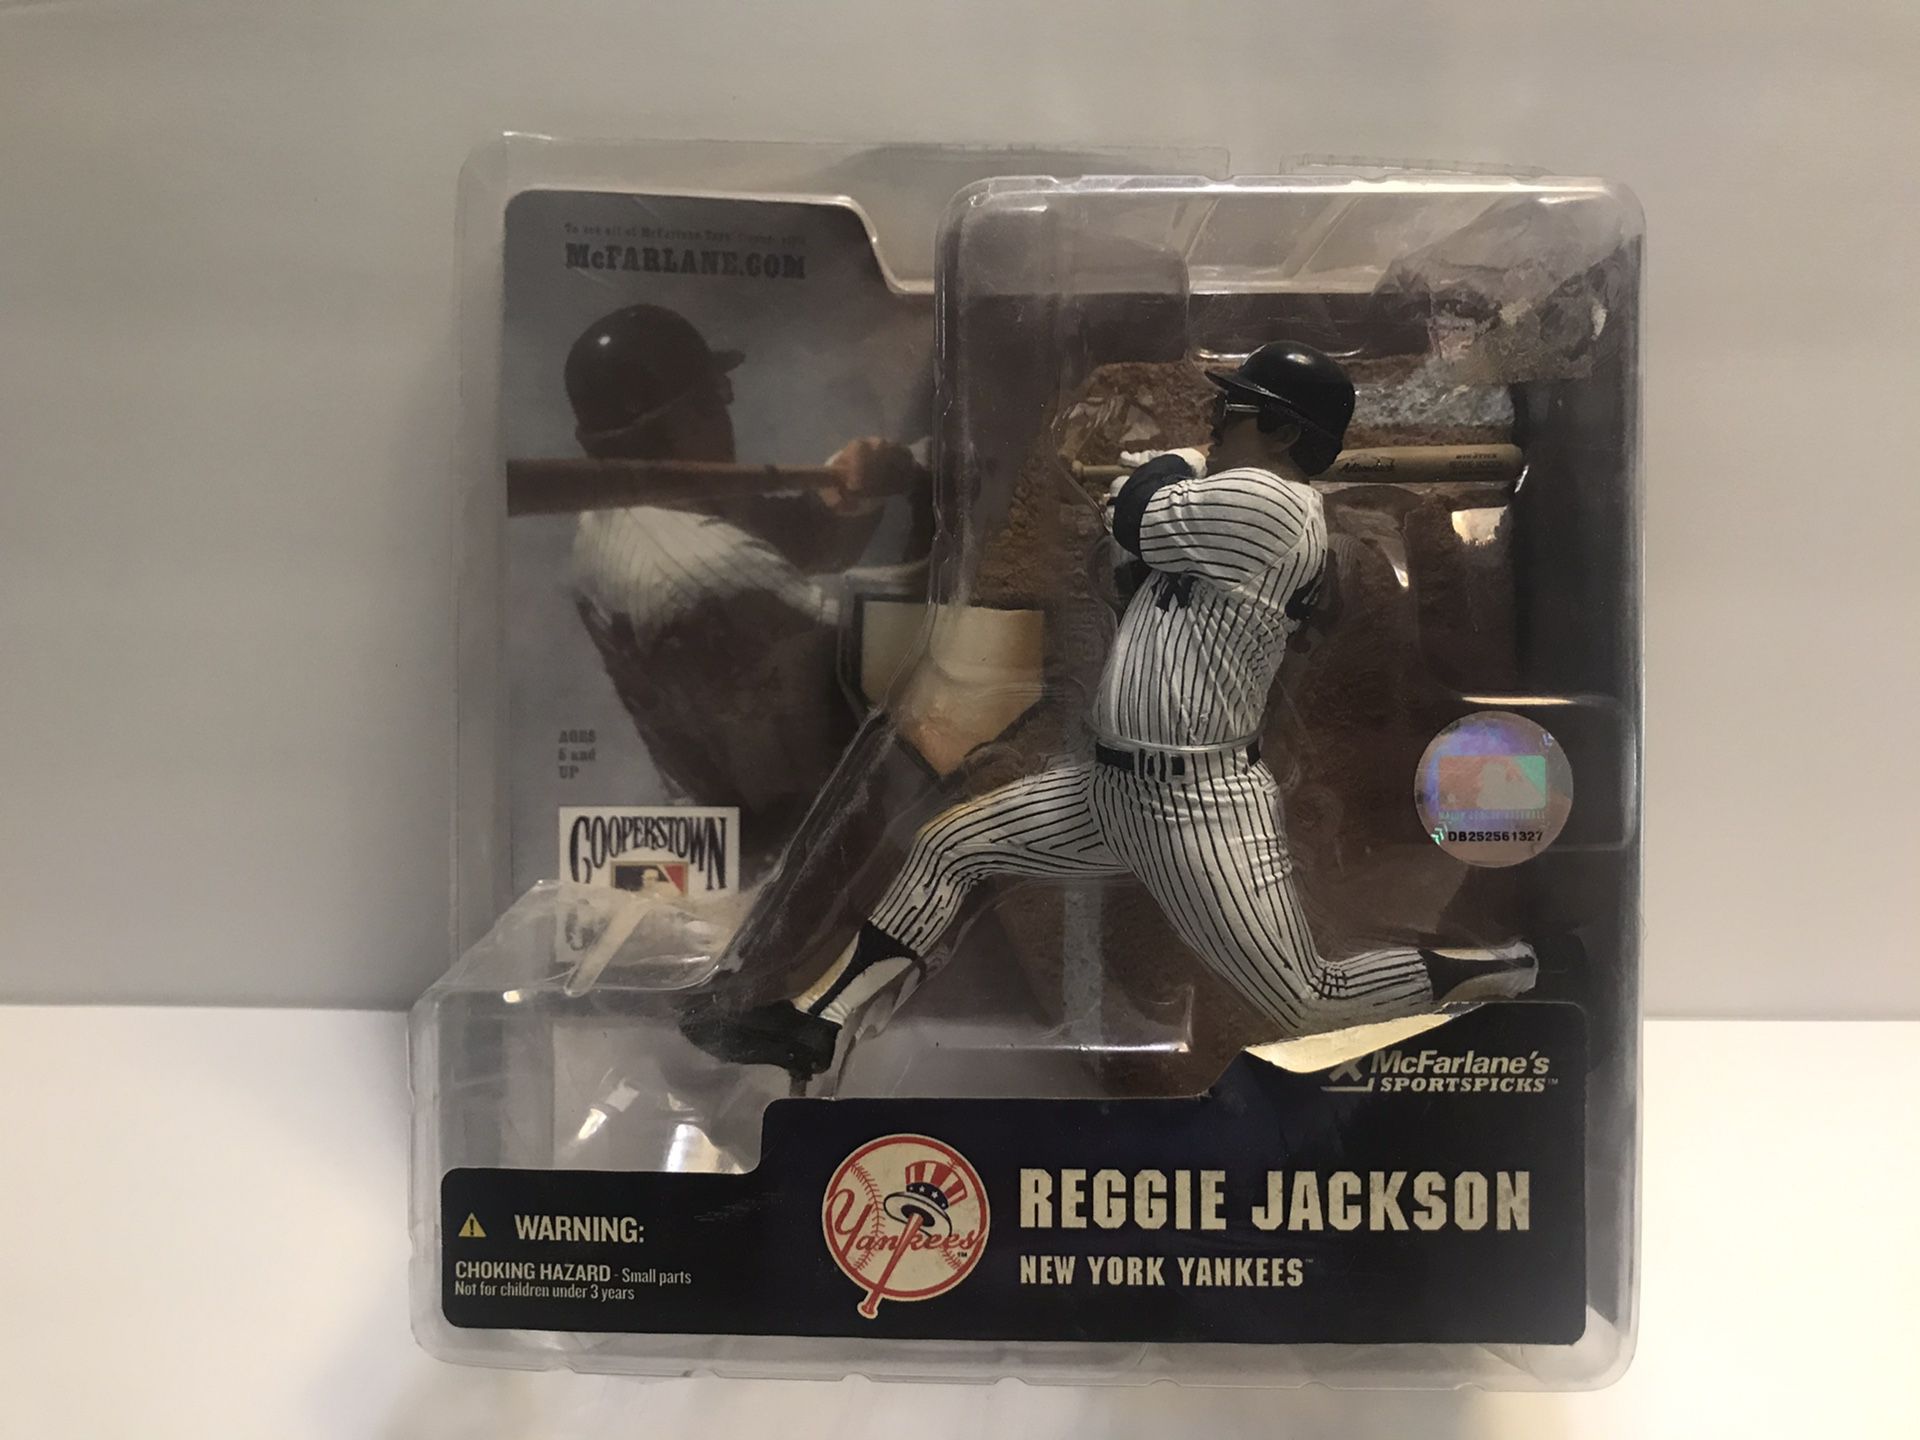 MLB Cooperstown Collection Reggie Jackson Action Figure